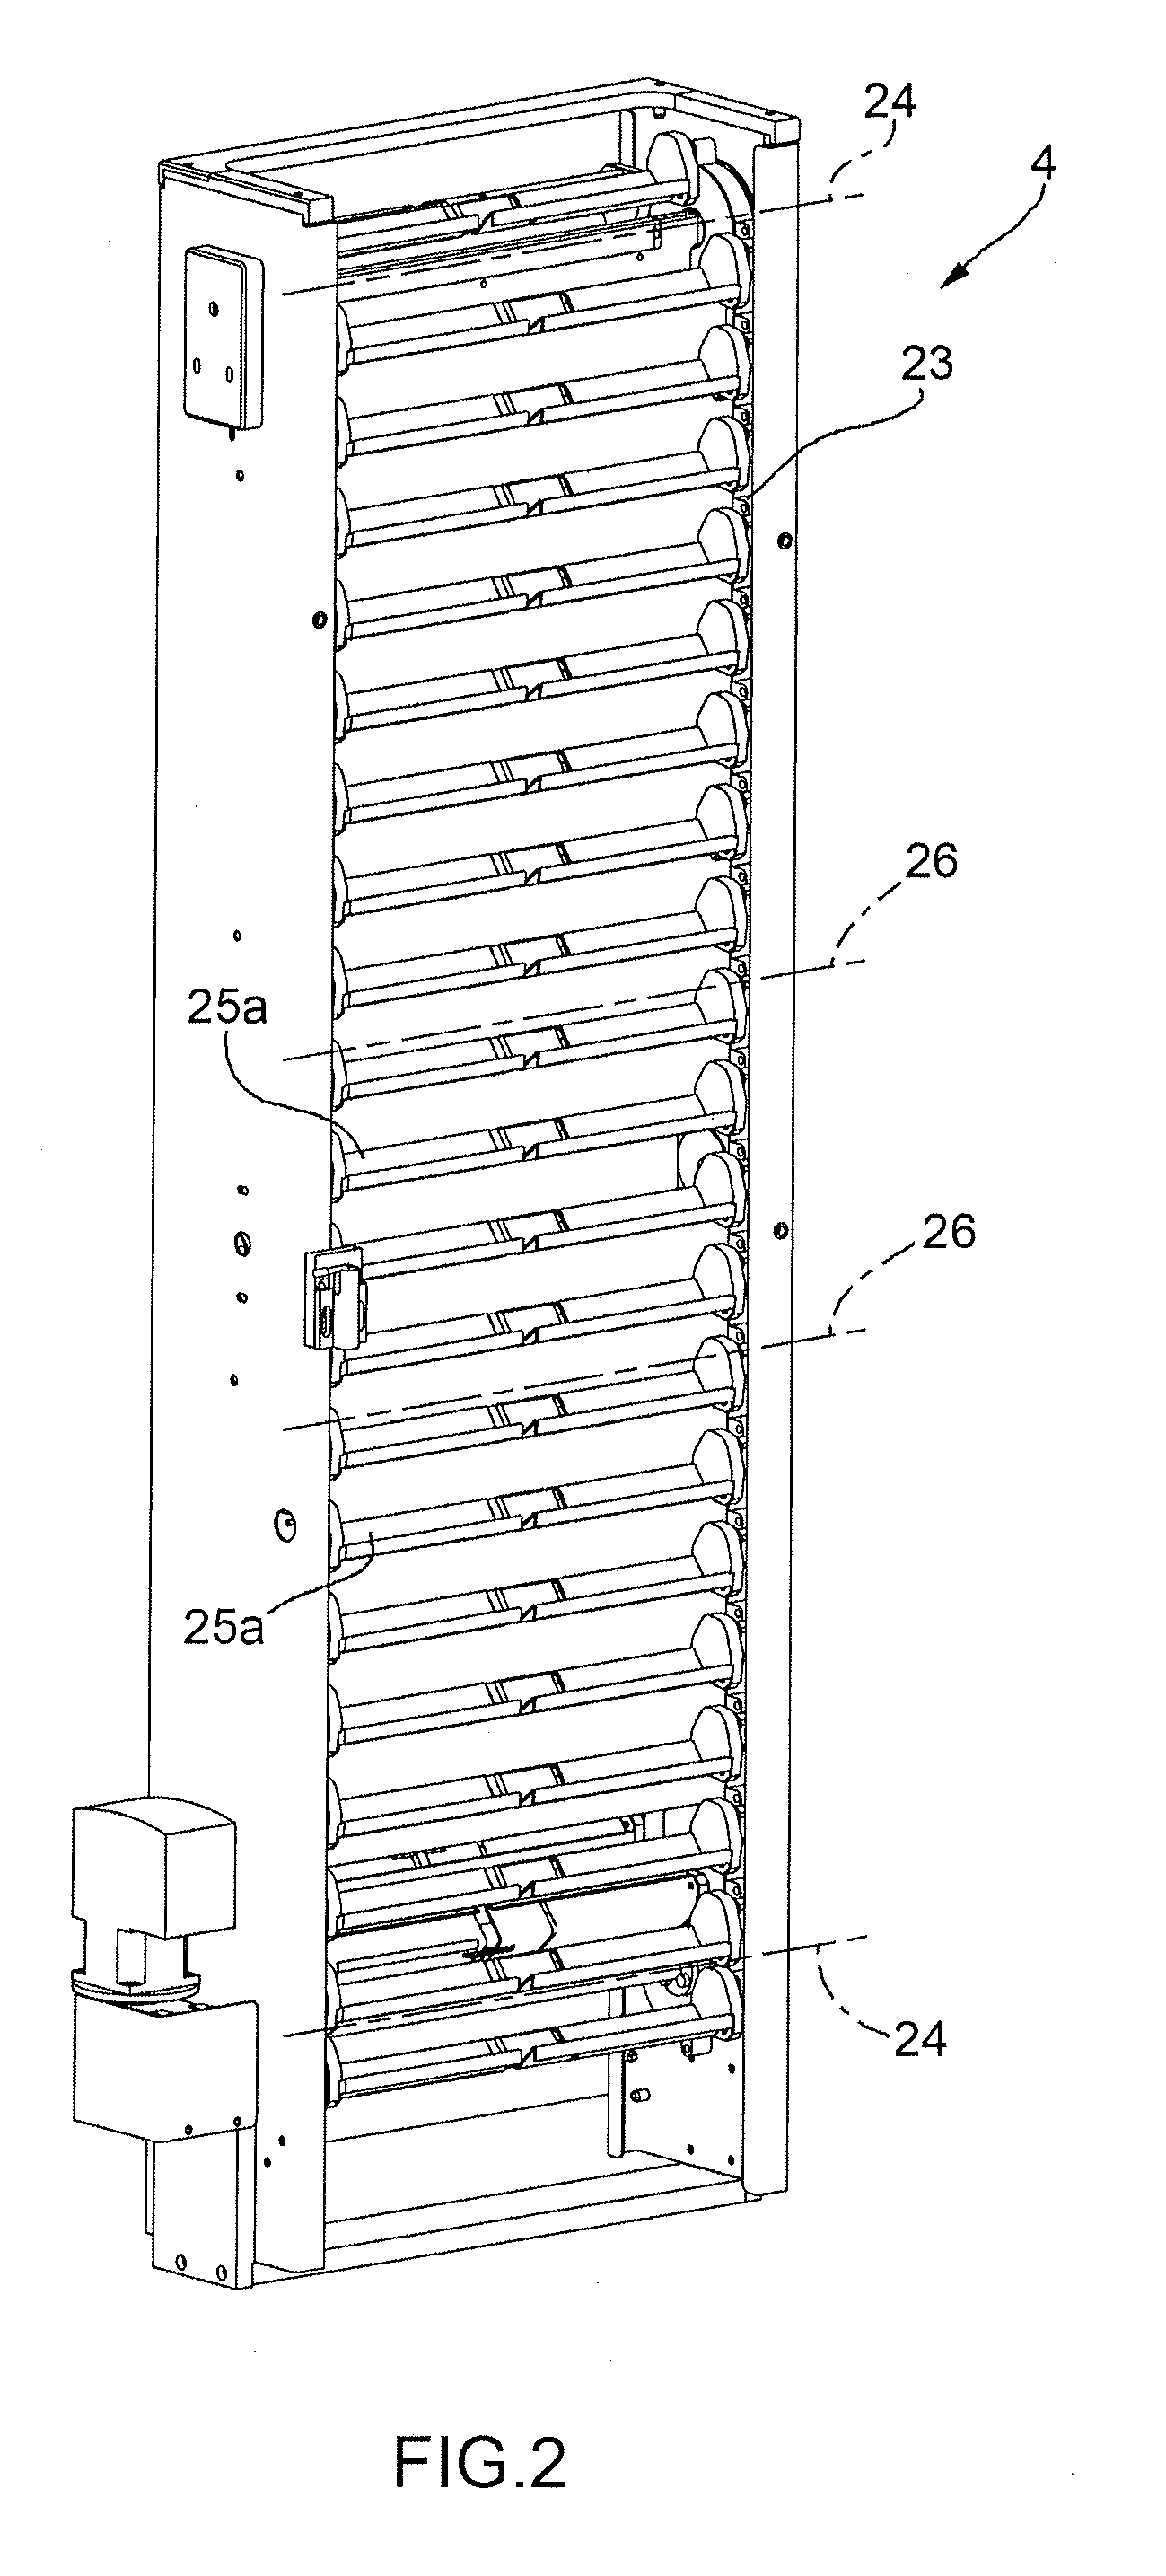 Syringe actuating method and assembly